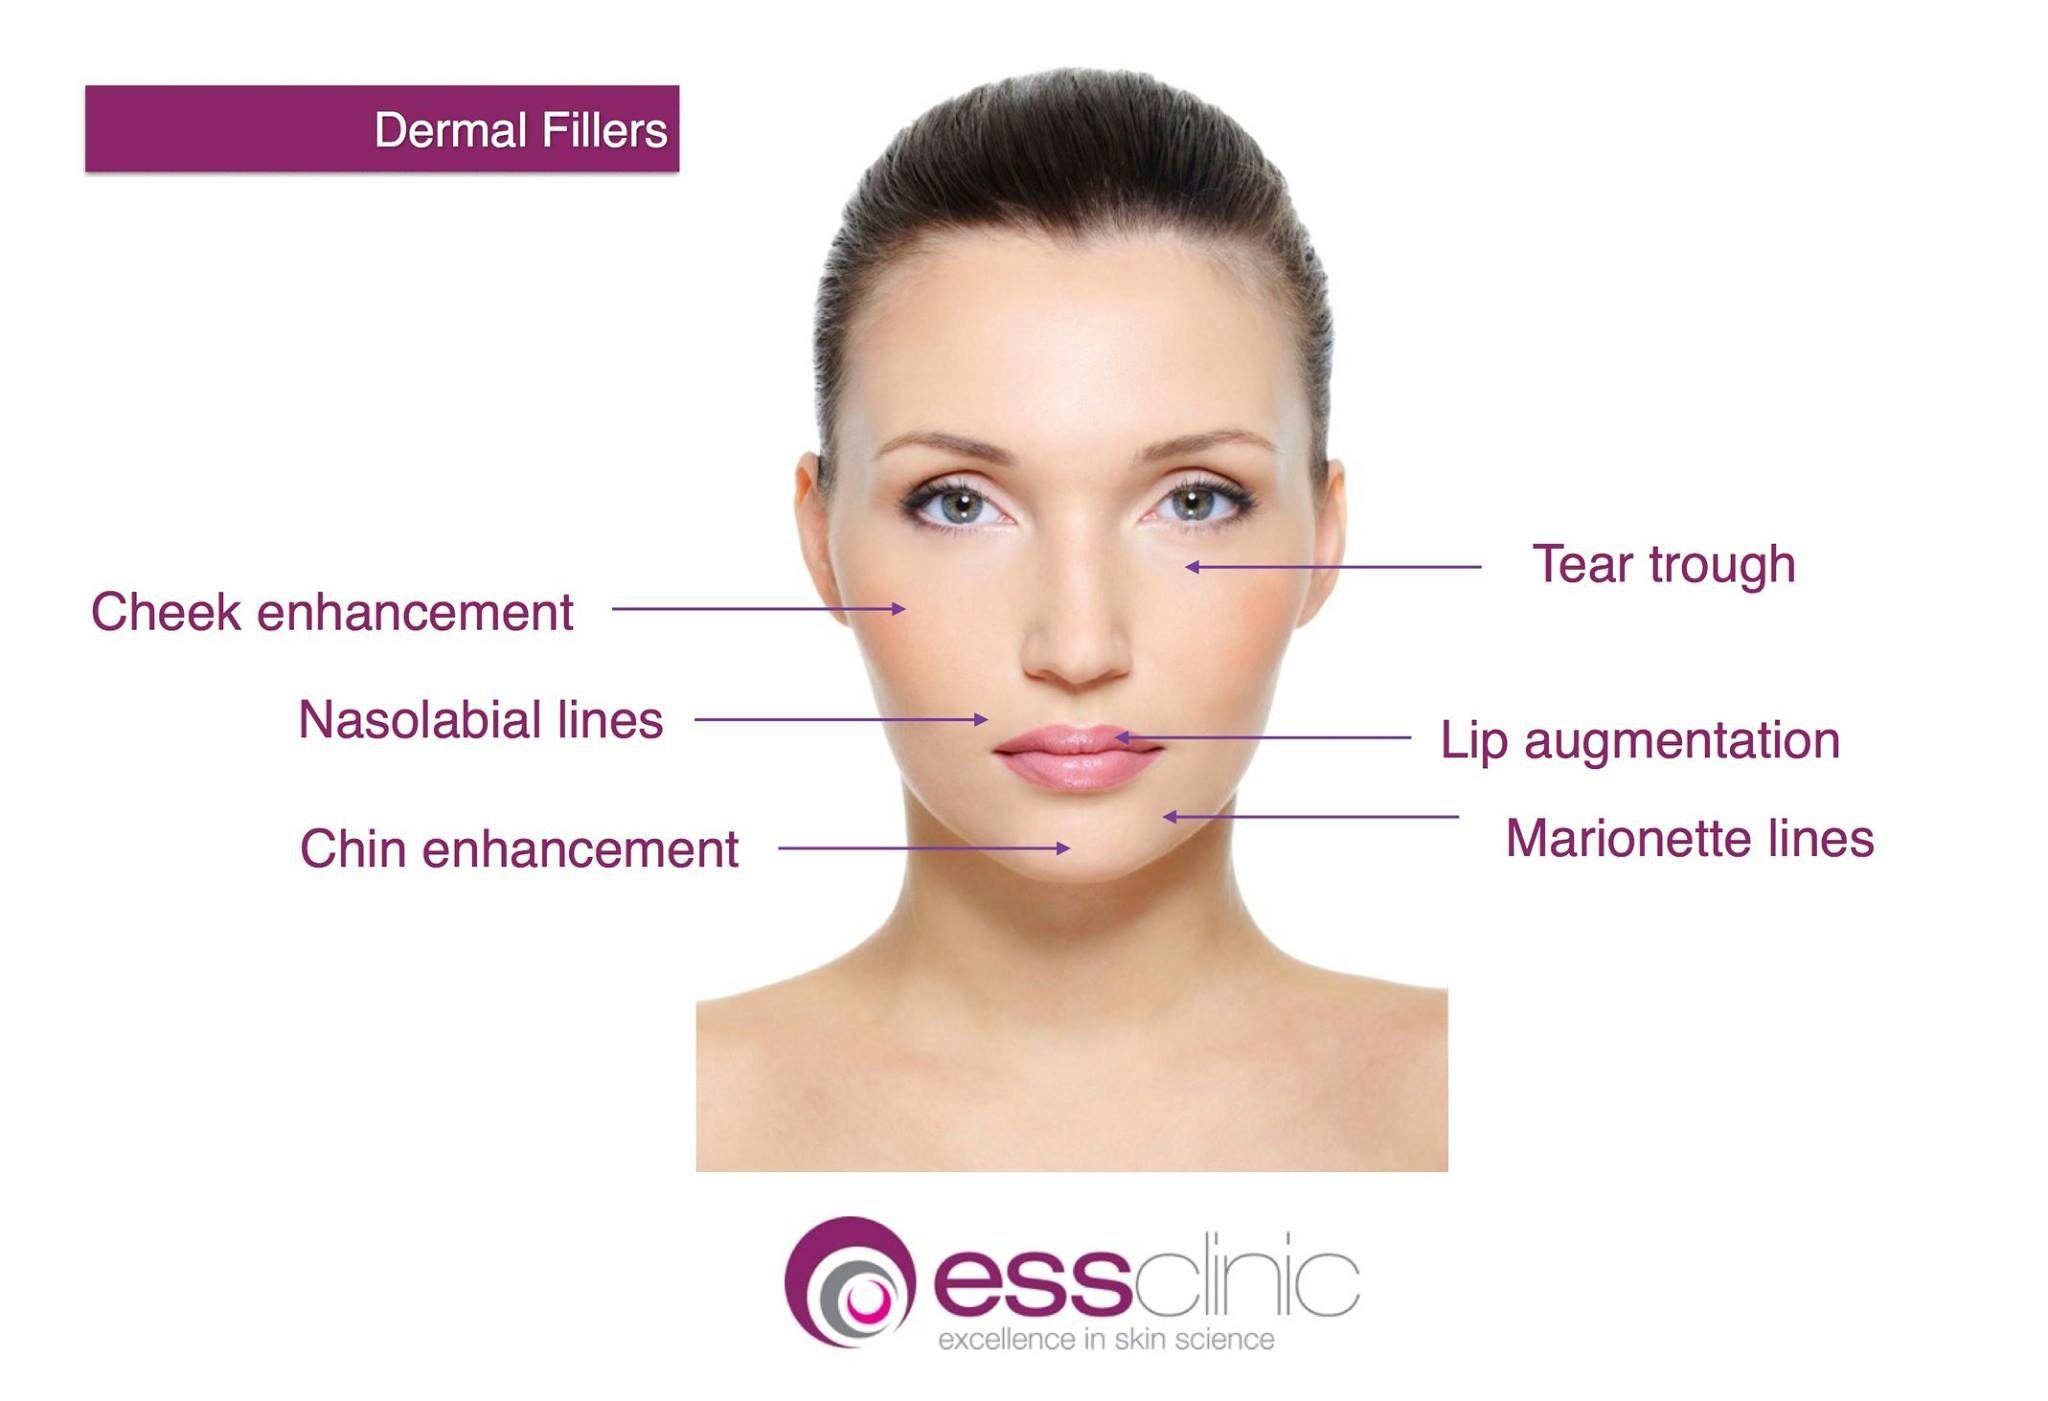 Dermal filler treatments are used to correct volume loss on the face. 